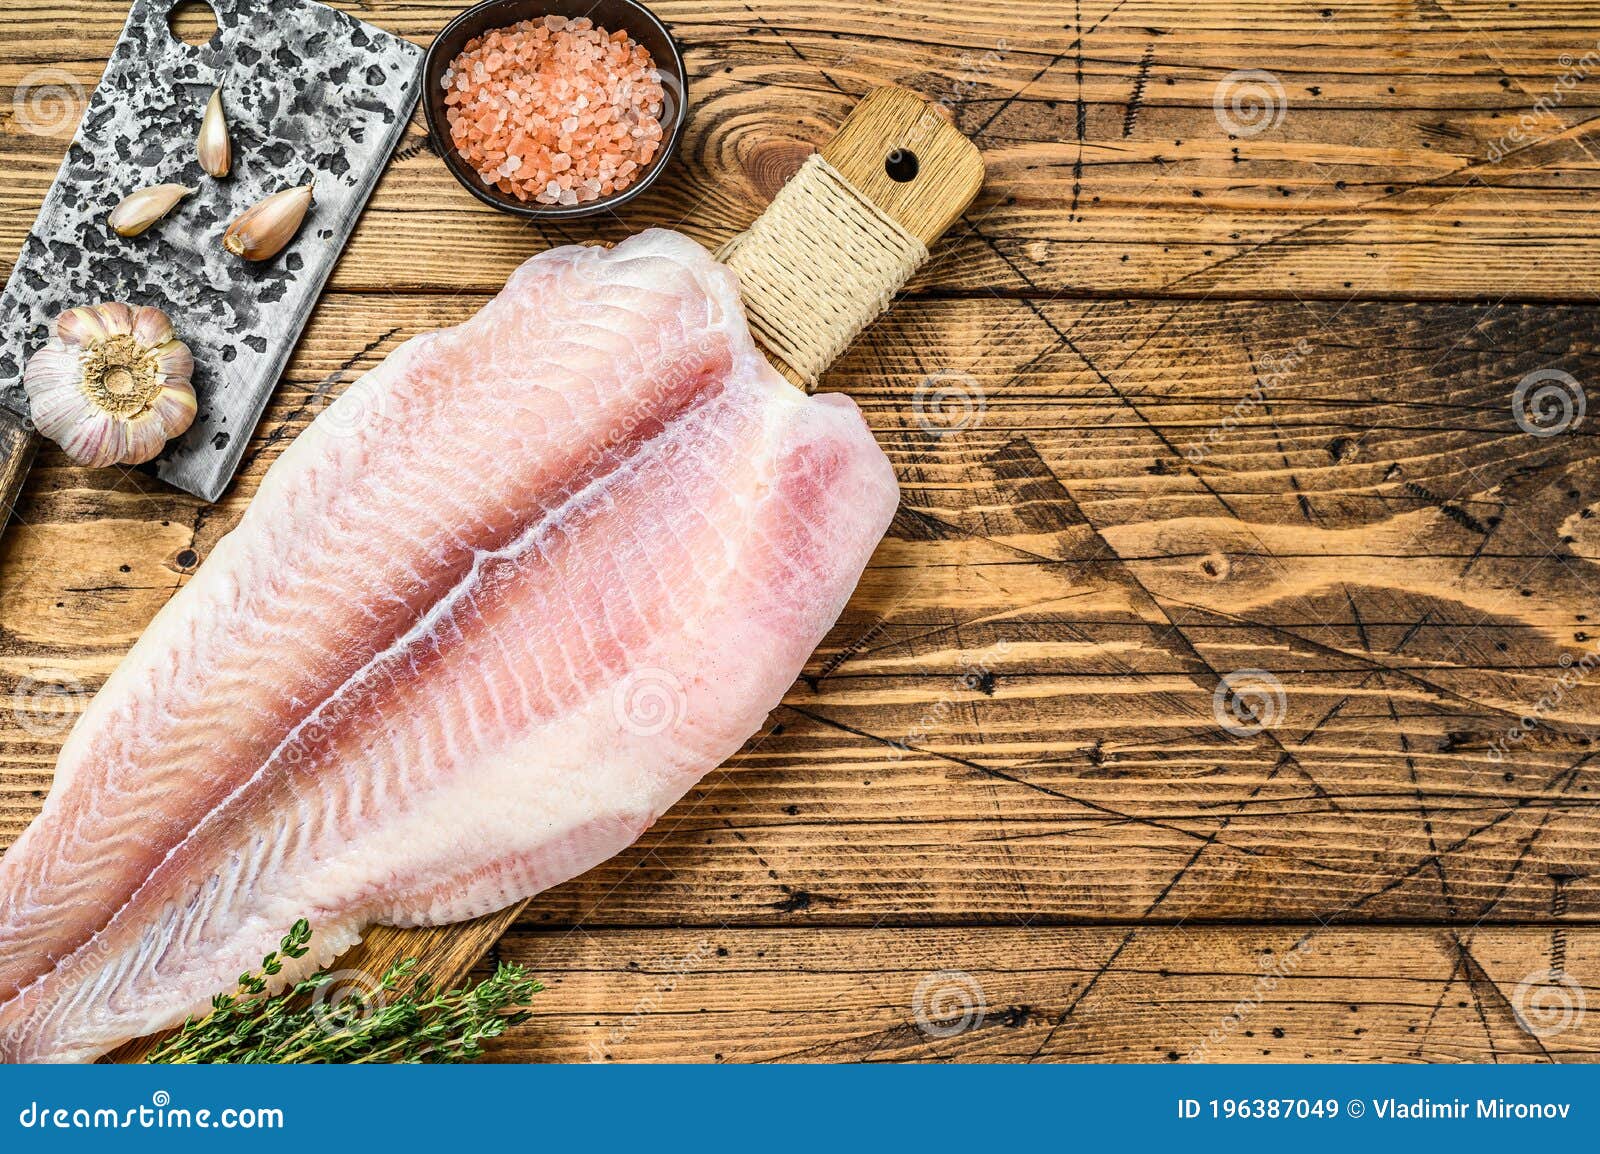 Raw Fillet of Pangasius Fish on a Cutting Board. Wooden Background